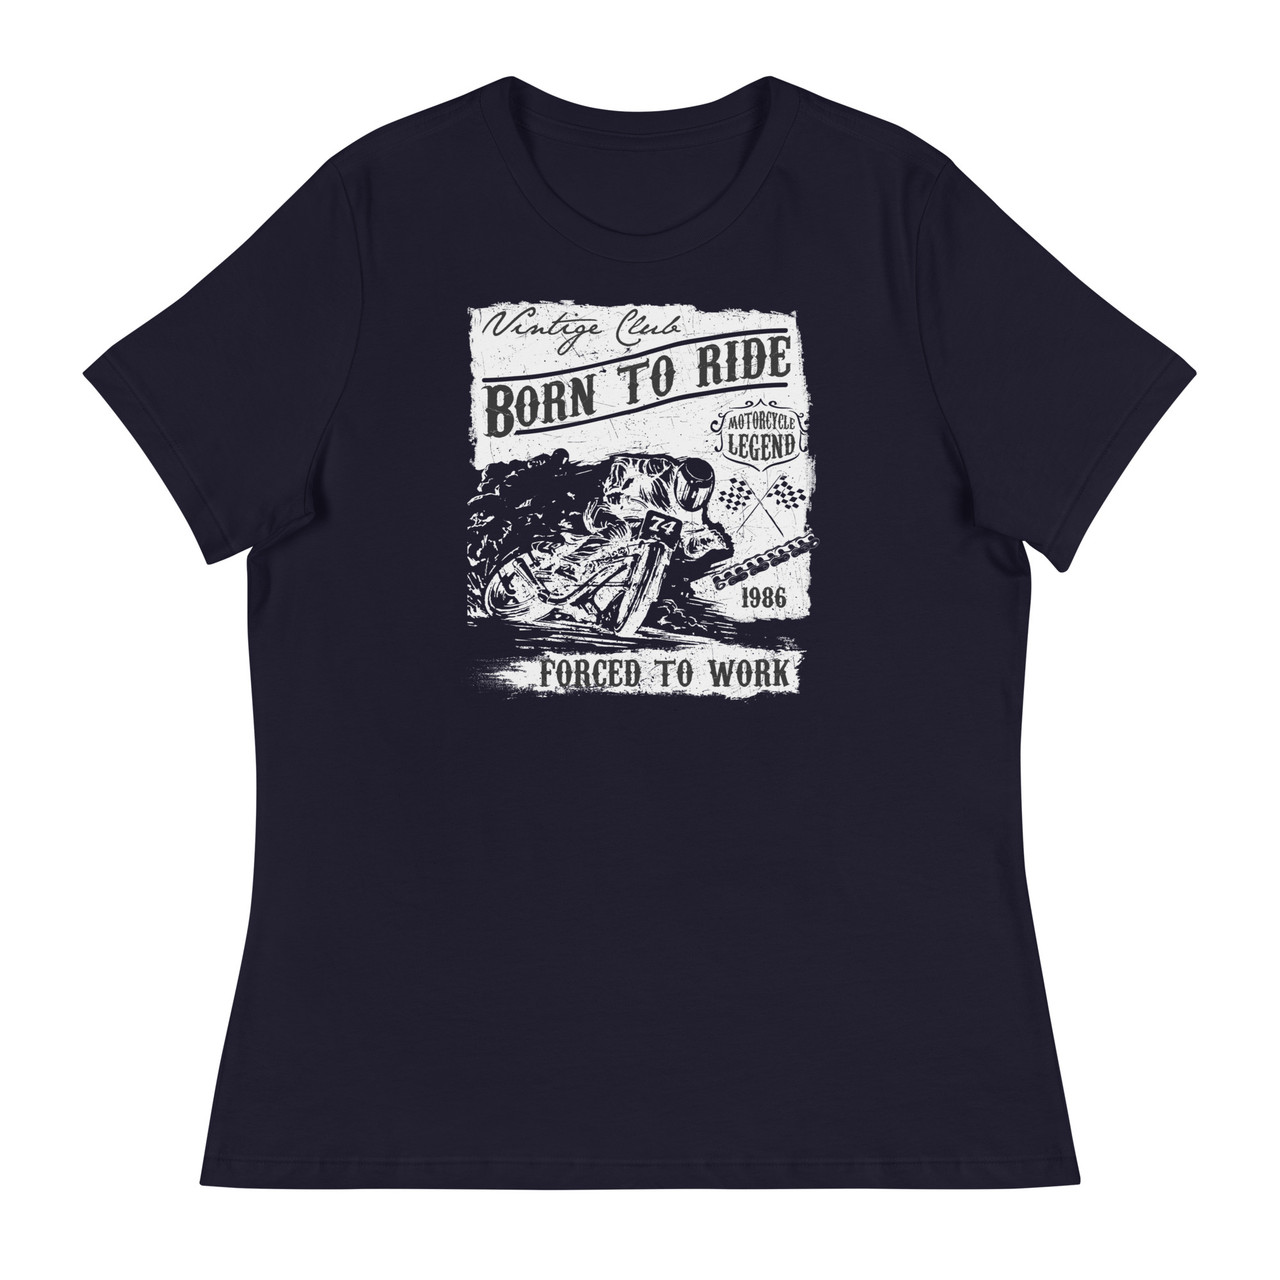 Navy Women's Relaxed T-Shirt - Bella + Canvas 6400 Born to Ride